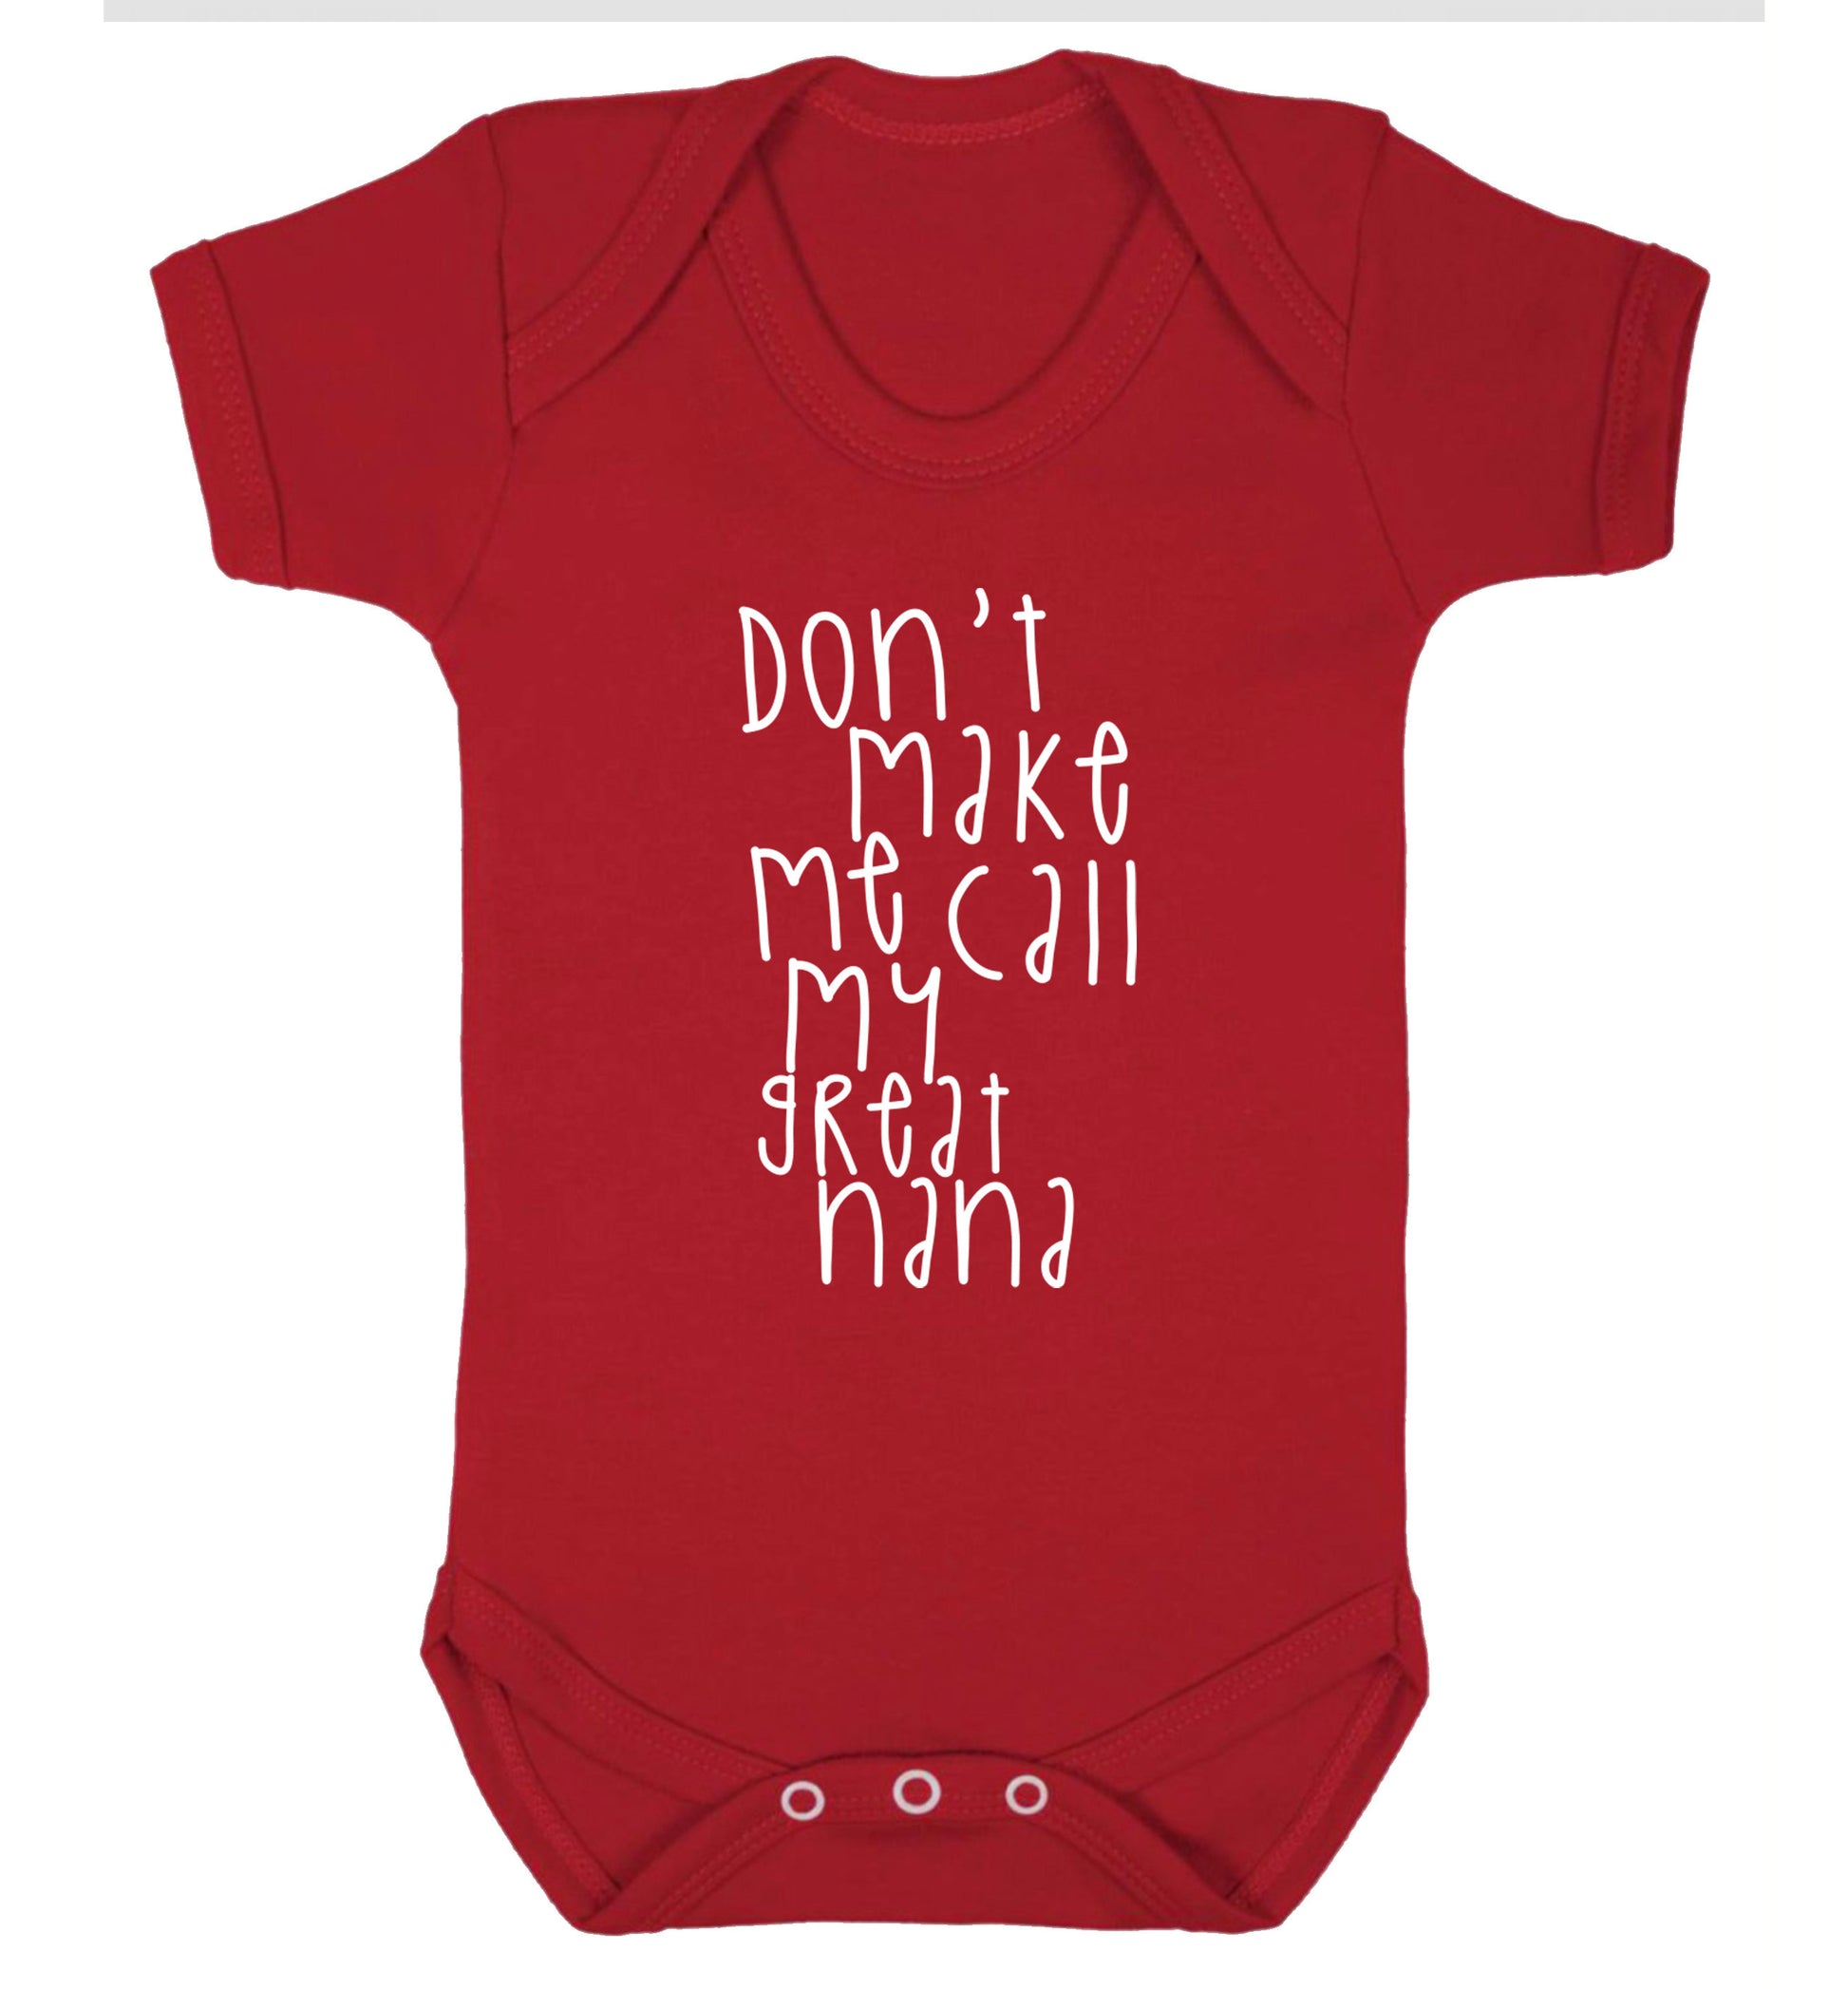 Don't make me call my great nana Baby Vest red 18-24 months